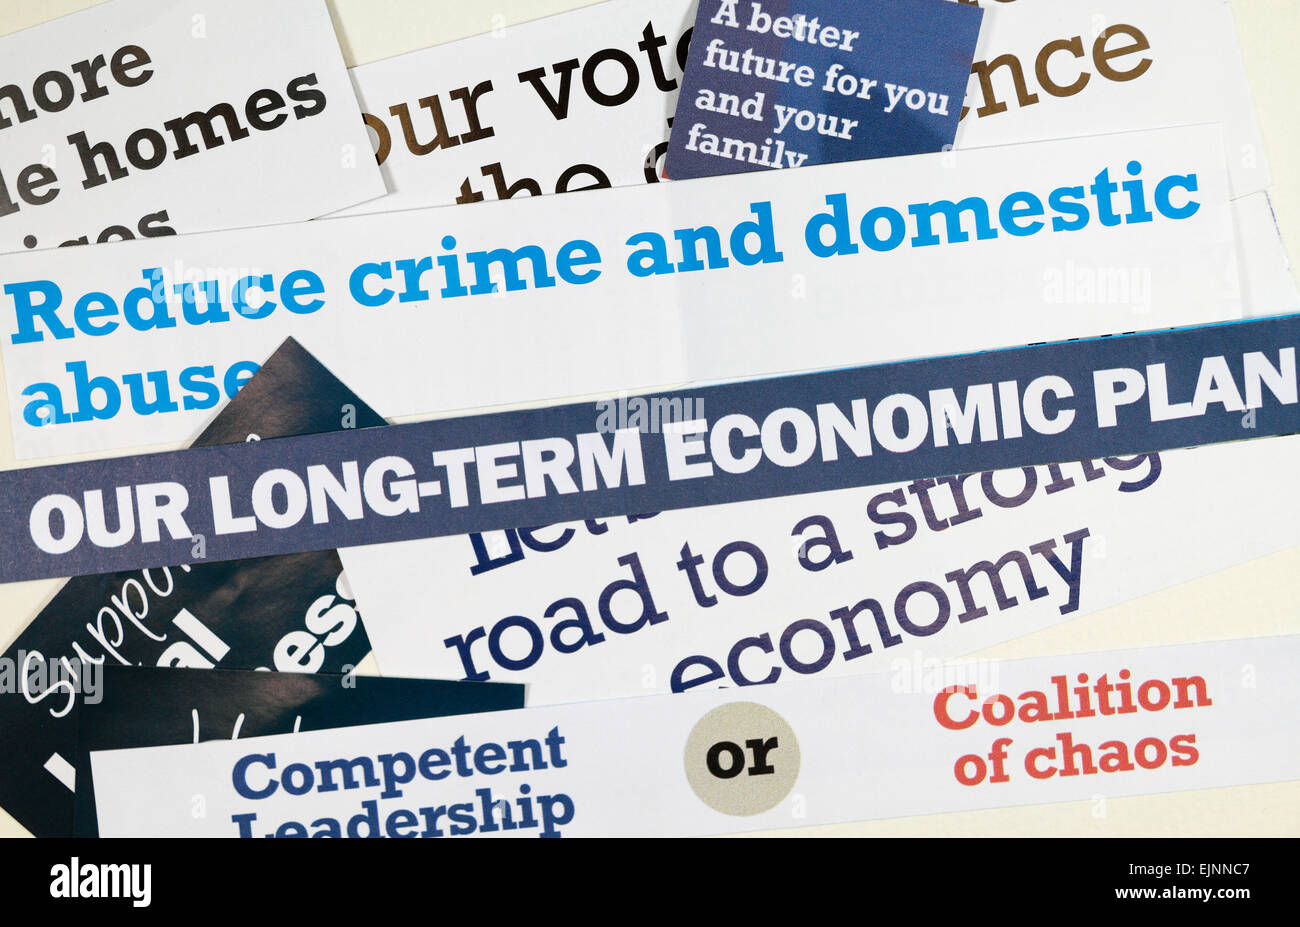 Cut out slogans from Conservative party literature received before the General Election in 2015 had begun. Stock Photo